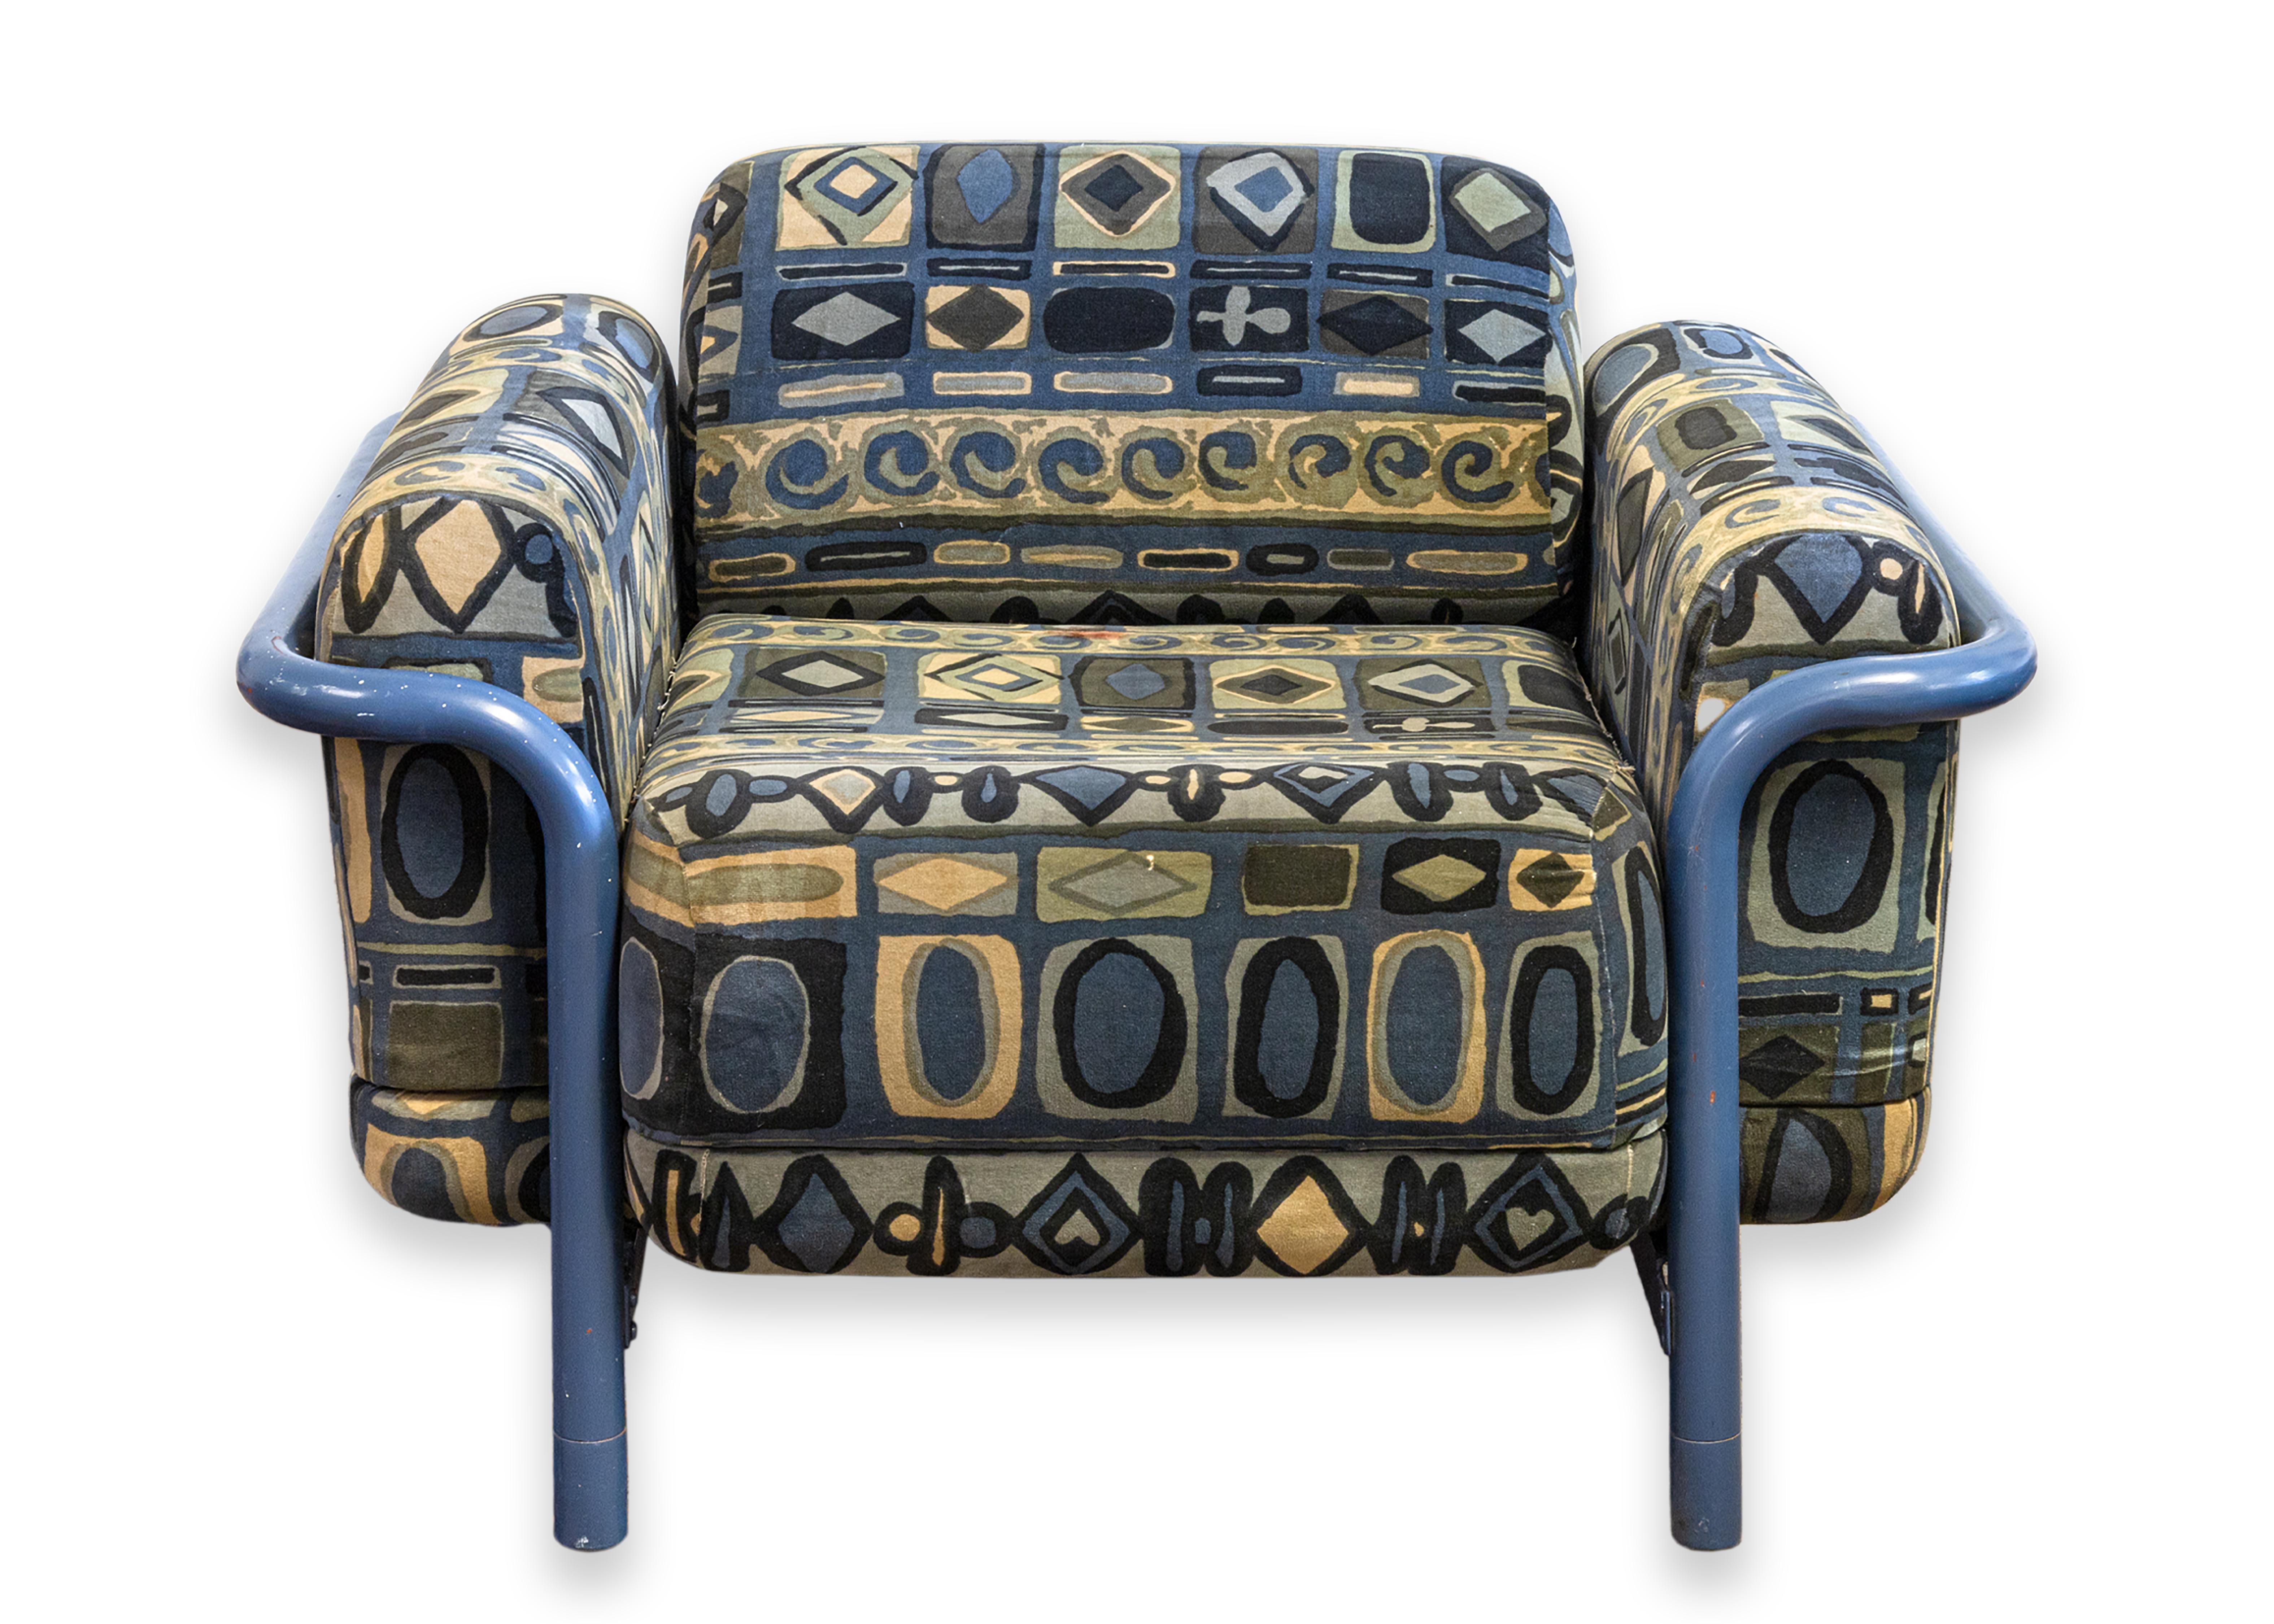 A unique chair prototype – a lounge chair by Ralph Rye for Marble Furniture Company. Circa 1970. The frame is constructed with tubular steel, powder coated in blue. Cushion seat, upholstered in Jack Lenor Larsen fabric, original to the prototype.